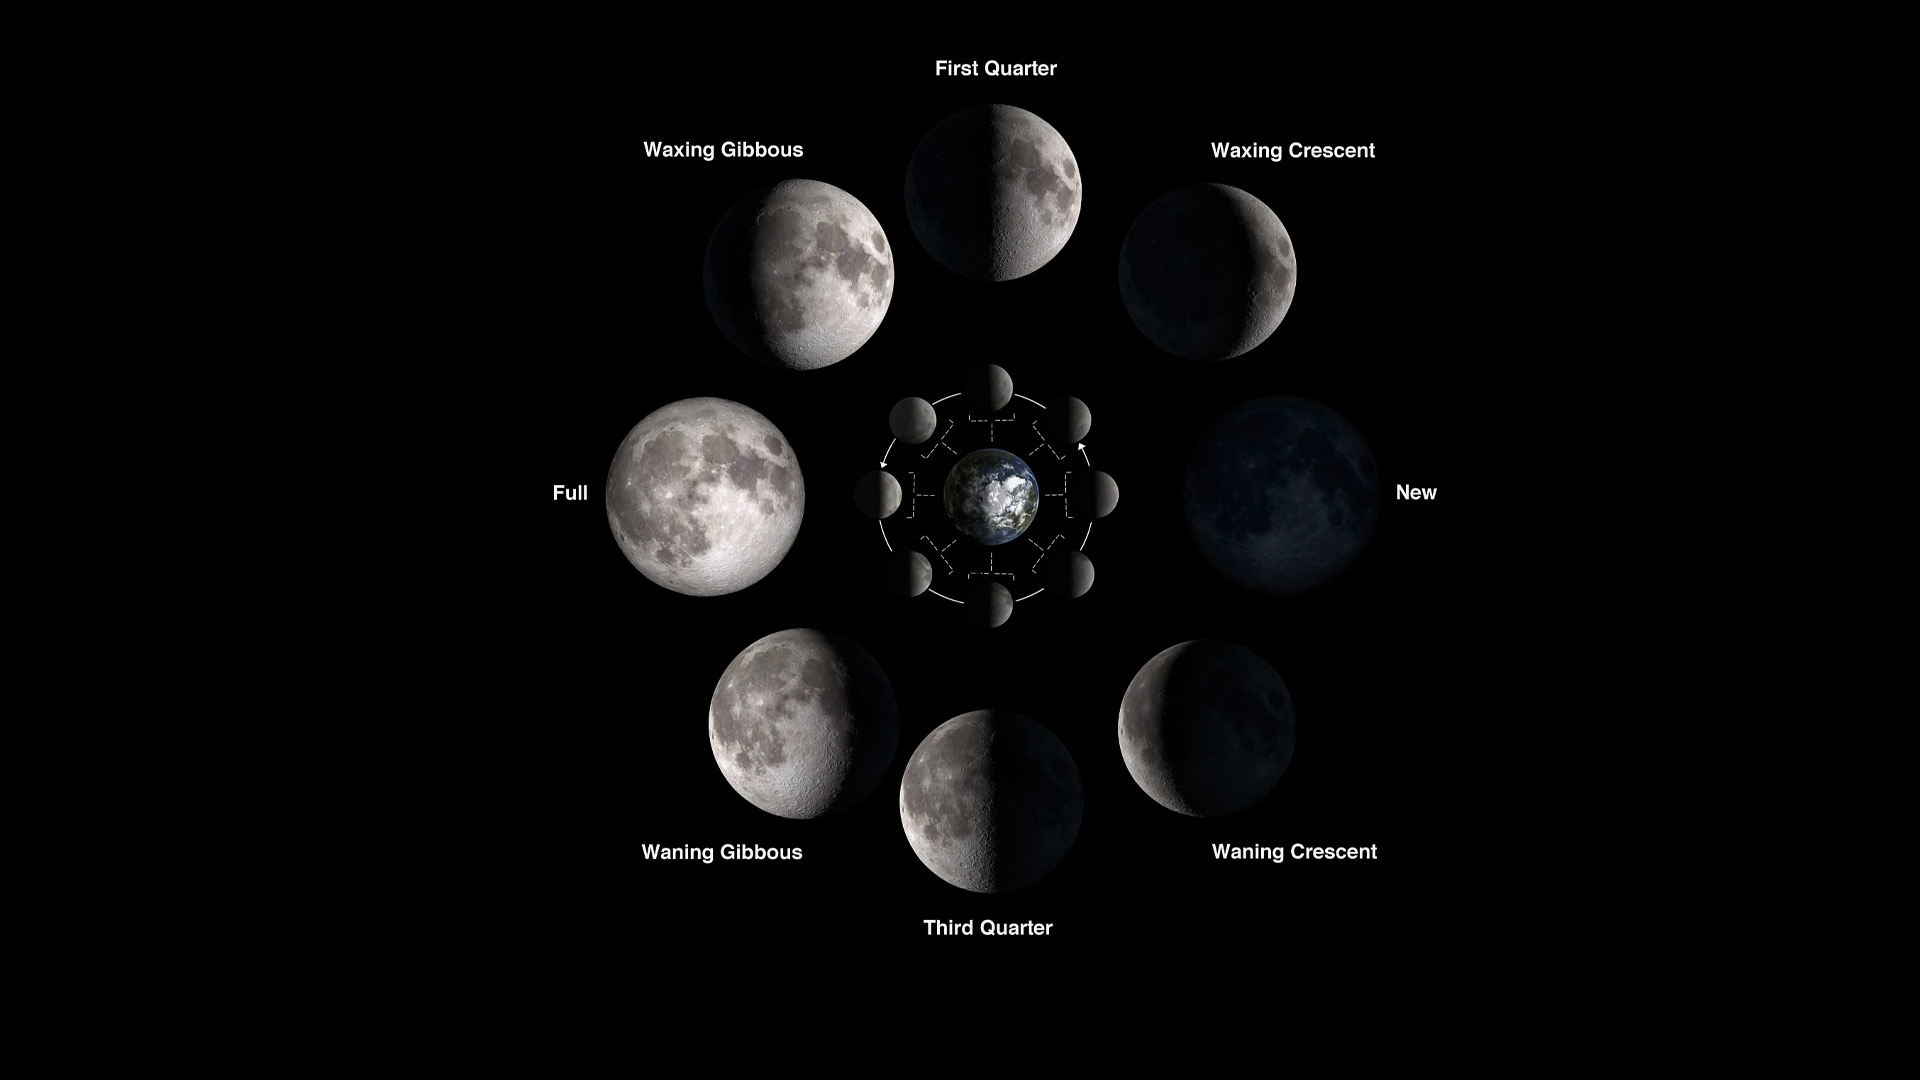 An illustration showing the phases of the Moon.